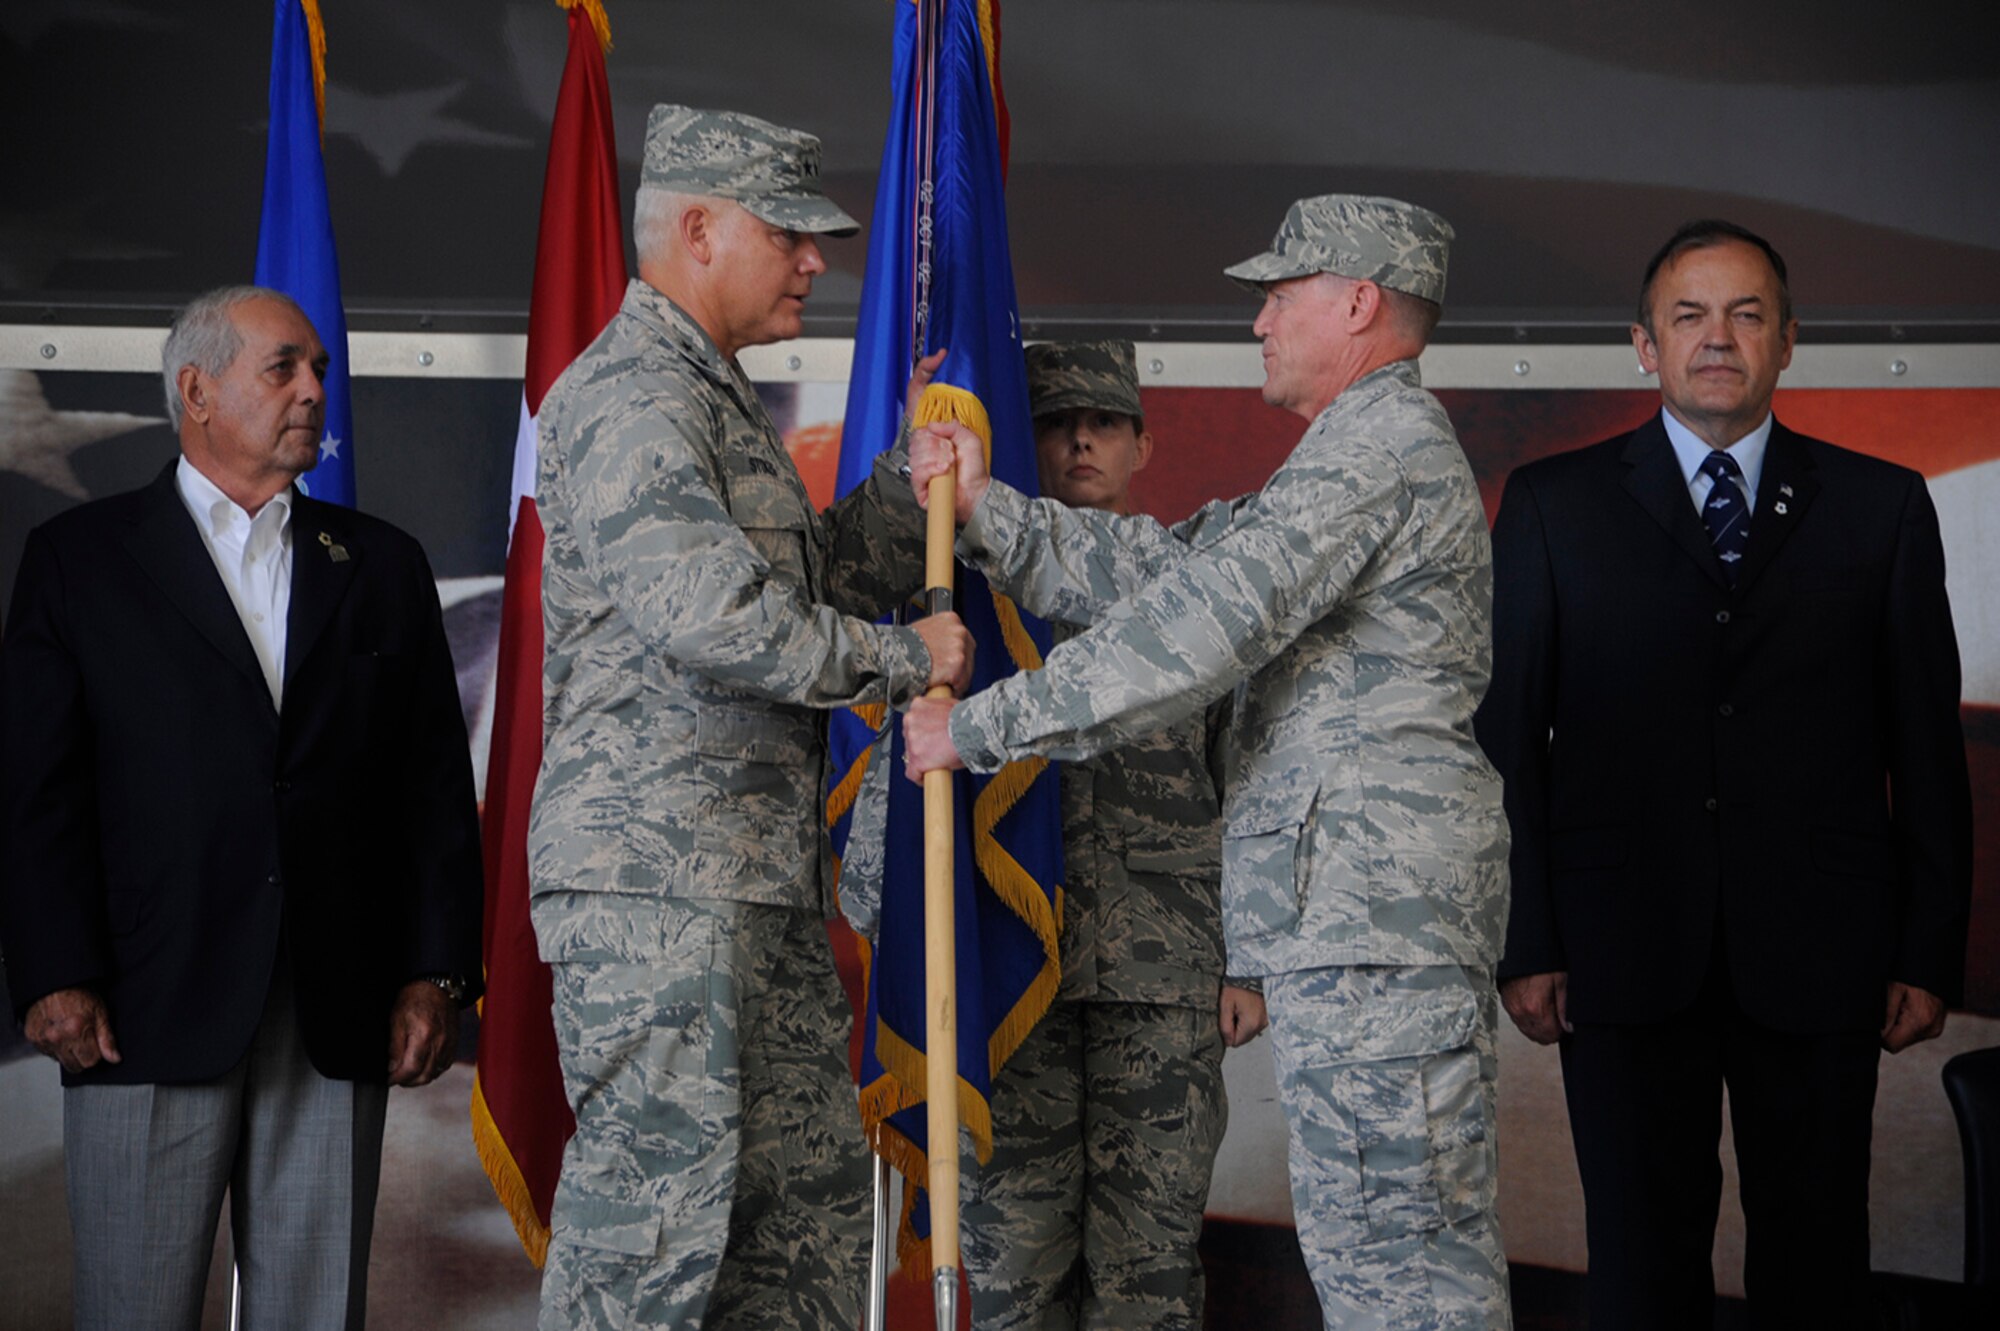 Pope Army Airfield, N.C.- Maj. Gen. John P. Stokes, Commander of the 22nd Air Force, receives the 440th Airlift Wing flag from Lt. Col. Karl Schmitkons, 440th Airlift Wing commander, during the inactivation ceremony of the 440th Airlift Wing. The 440th Airlift Wing inactivated September 18, 2016, at Pope Field, N.C. The third oldest unit in the Air Force, the 440th AW's first operational drop was in Normandy, France on D-Day. From 2007 to 2016, while based at Fort Bragg, the unit provided air support for more than 102,000 paratroopers, flew more than 27,000 hours, and supported Operations CORONET OAK, IRAQI FEREDOM, NEW DAWN, ENDURING FREEDOM, UNIFIED RESPONSE, and INHERENT RESOLVE. (US Air Force photo by Master Sgt. Kevin Brody) 
